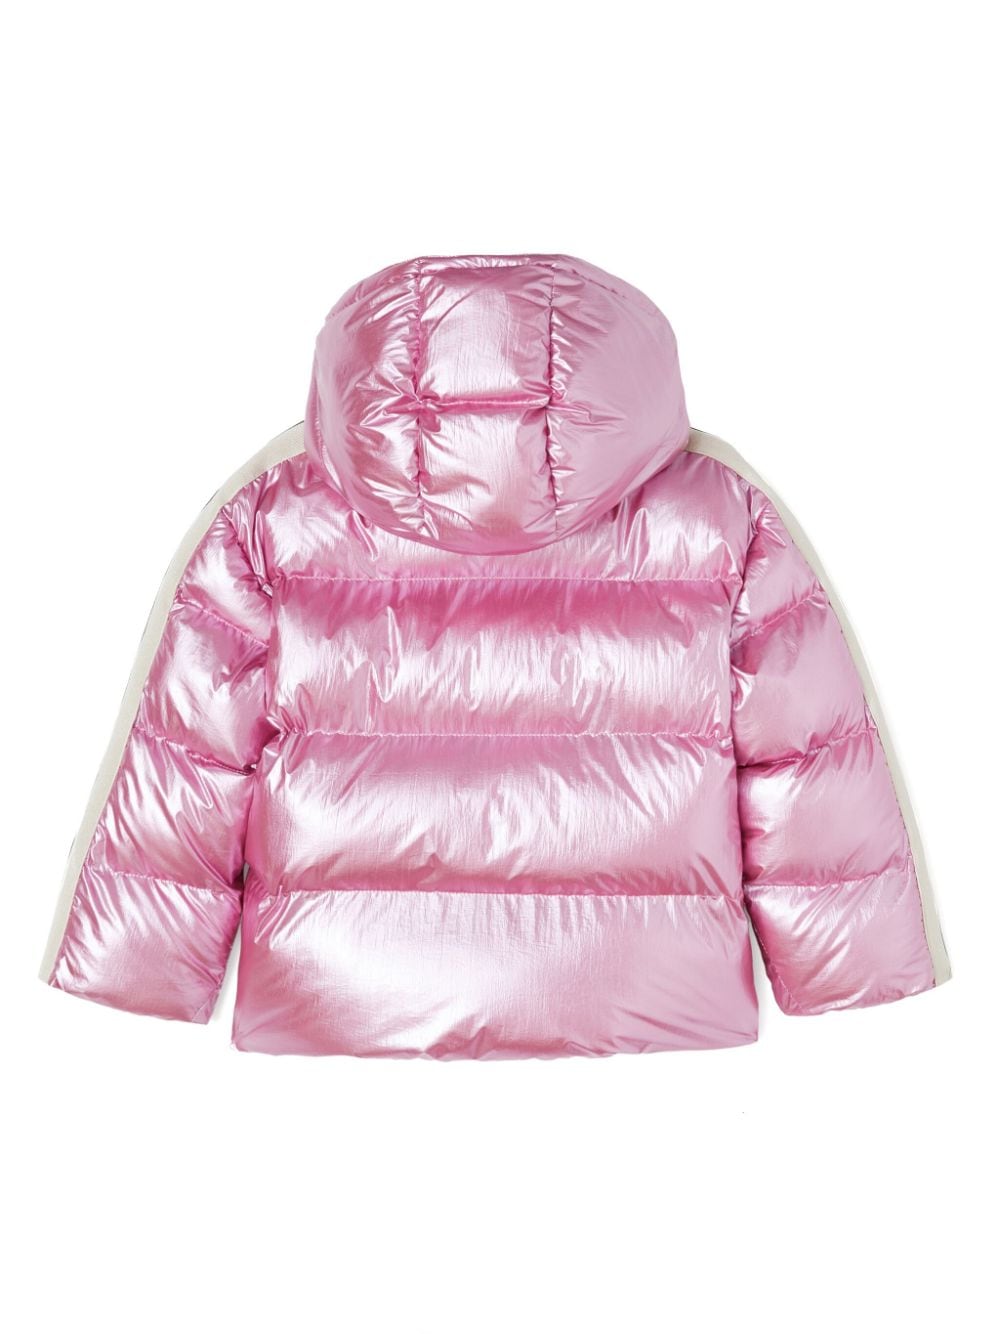 Pink polyester jacket for girls